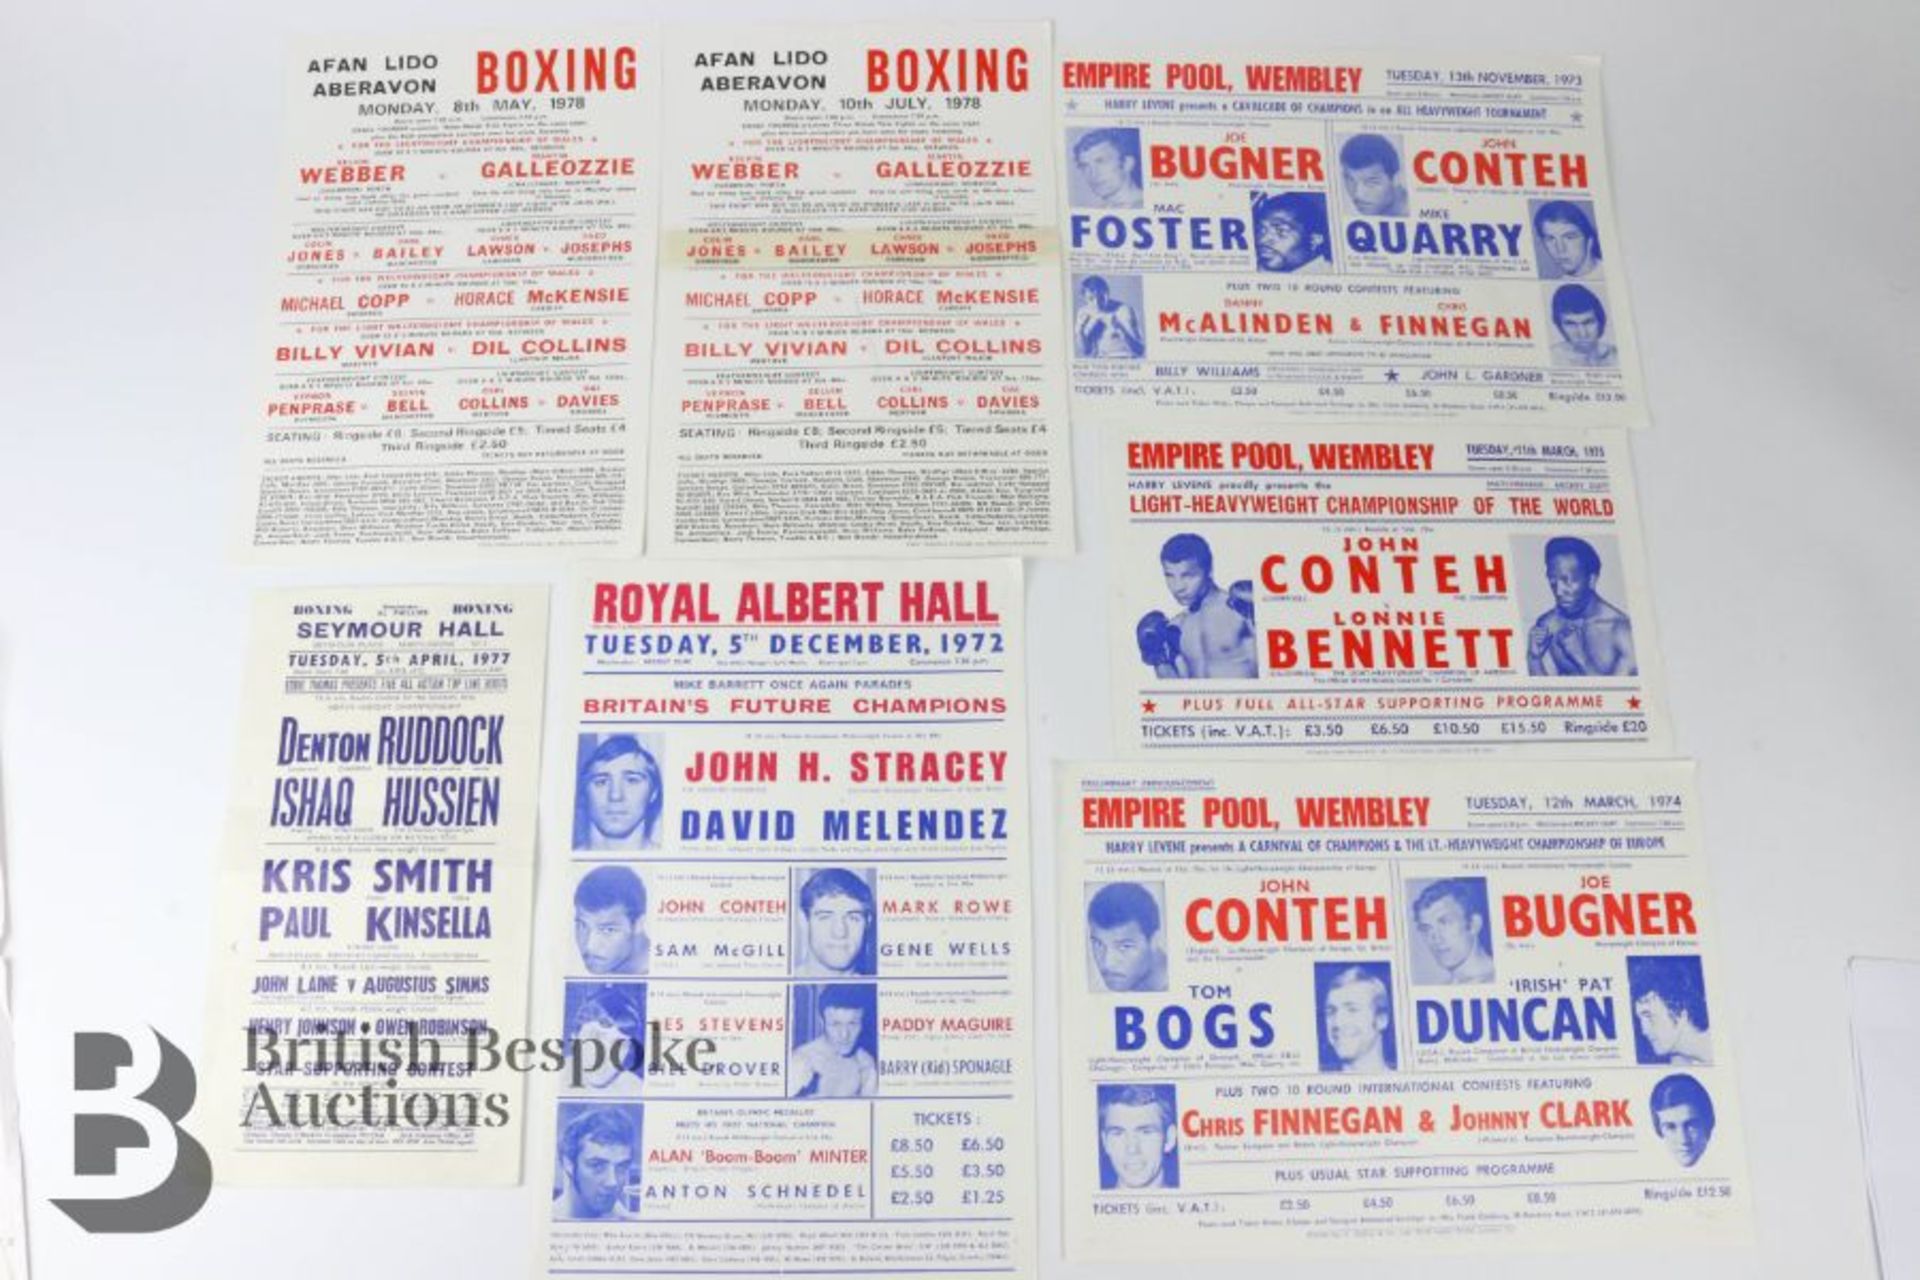 Pugilista Interest - Match Flyers and Posters - Image 5 of 9